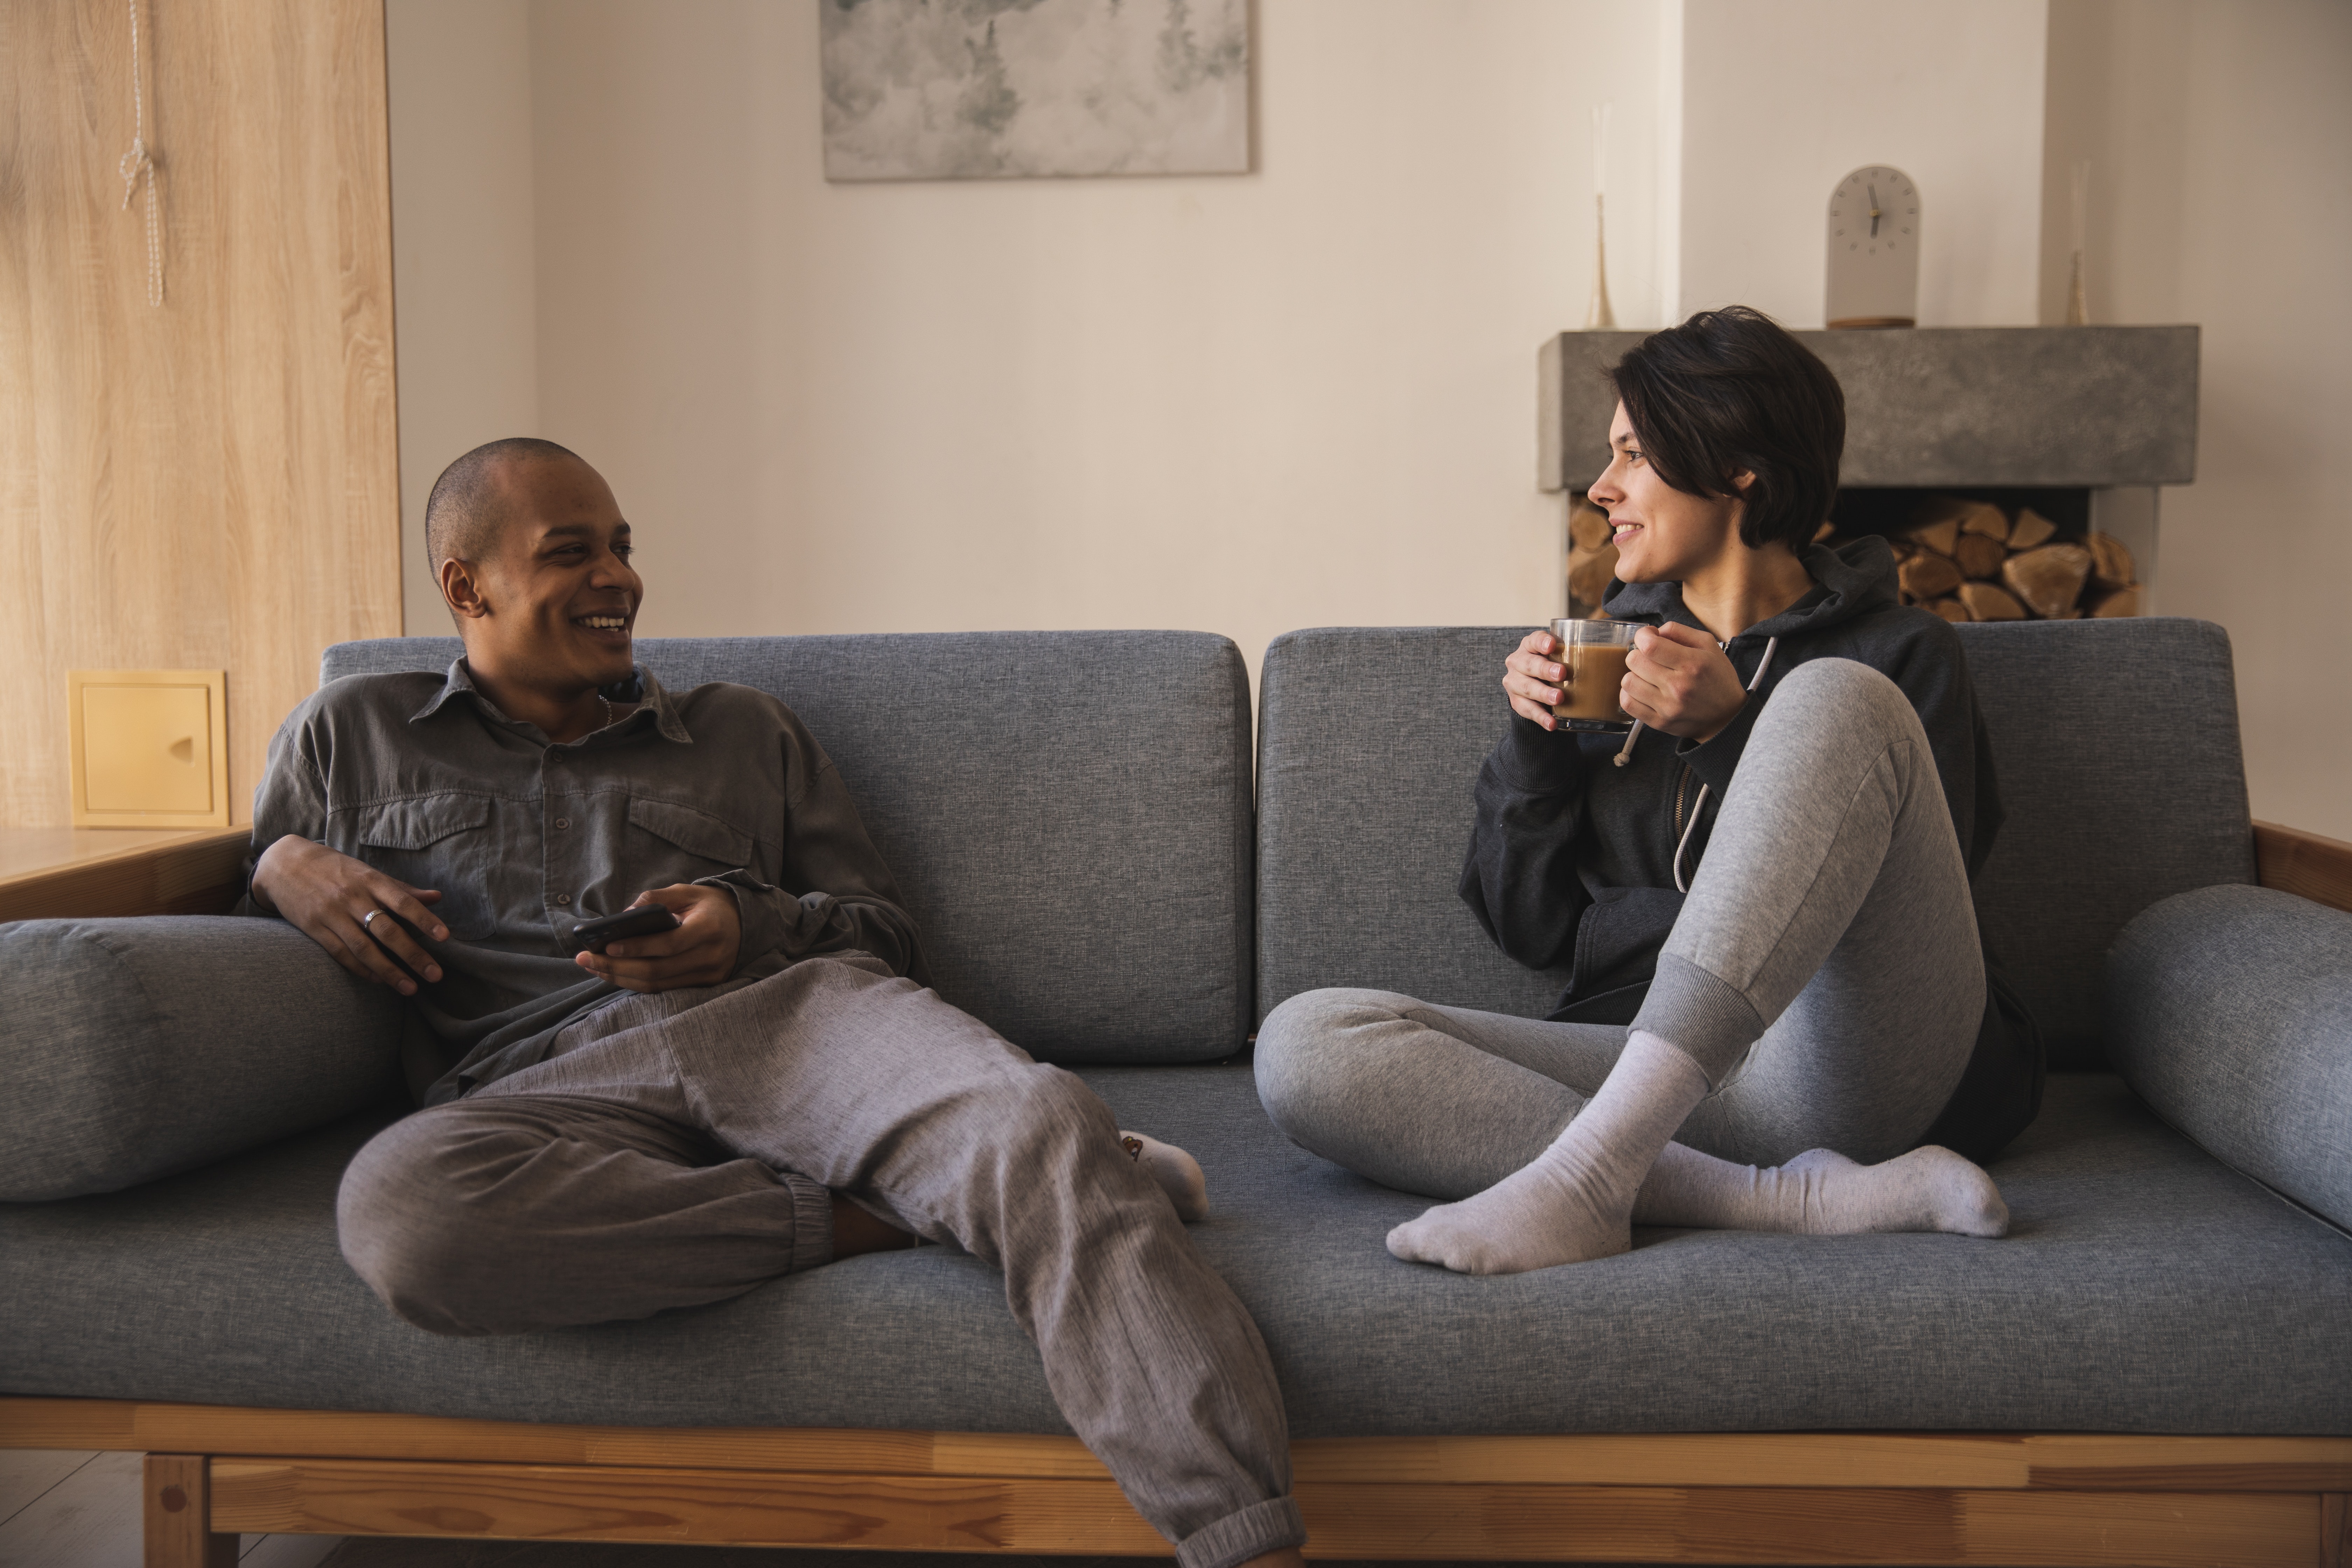 A couple talking and relaxing on a couch together. | Source: Pexels